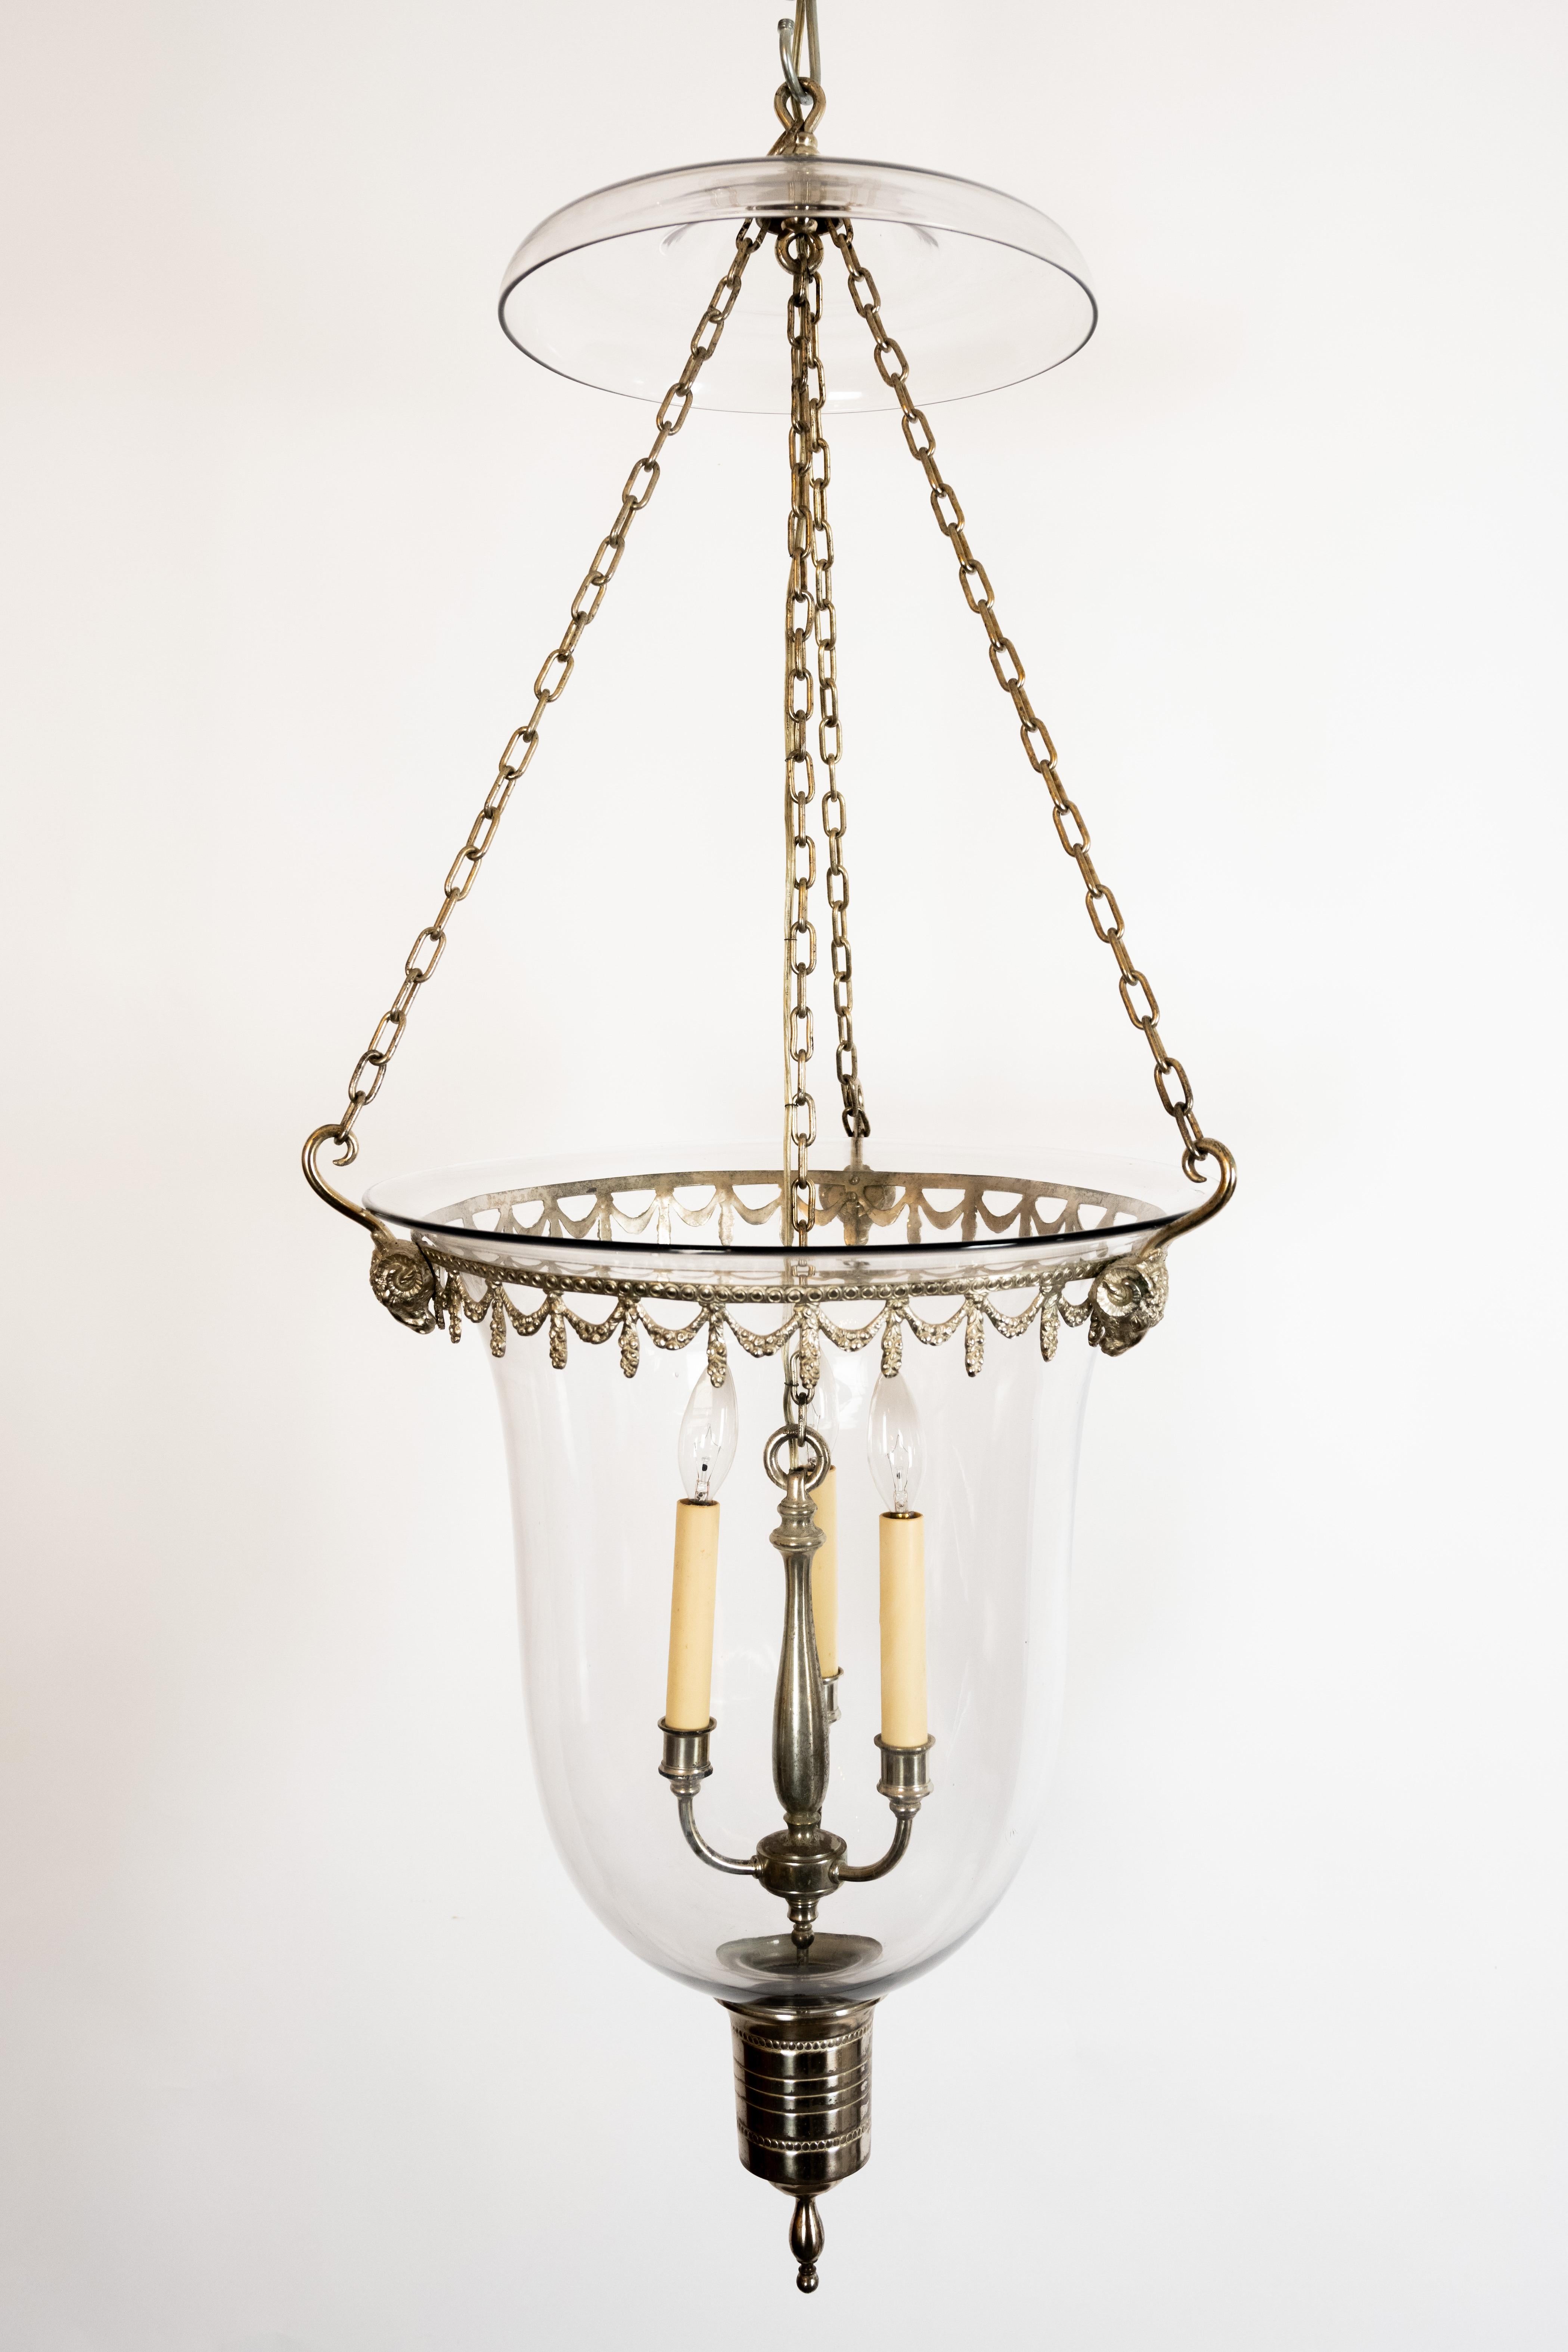 Georgian style hanging glass lantern. Silver chains suspend an ornate wreath frame featuring Rams head details from the glass smoke bell. Three Candelabra bulbs attached to a baluster shaped column provide illumination. The bottom of the blown glass